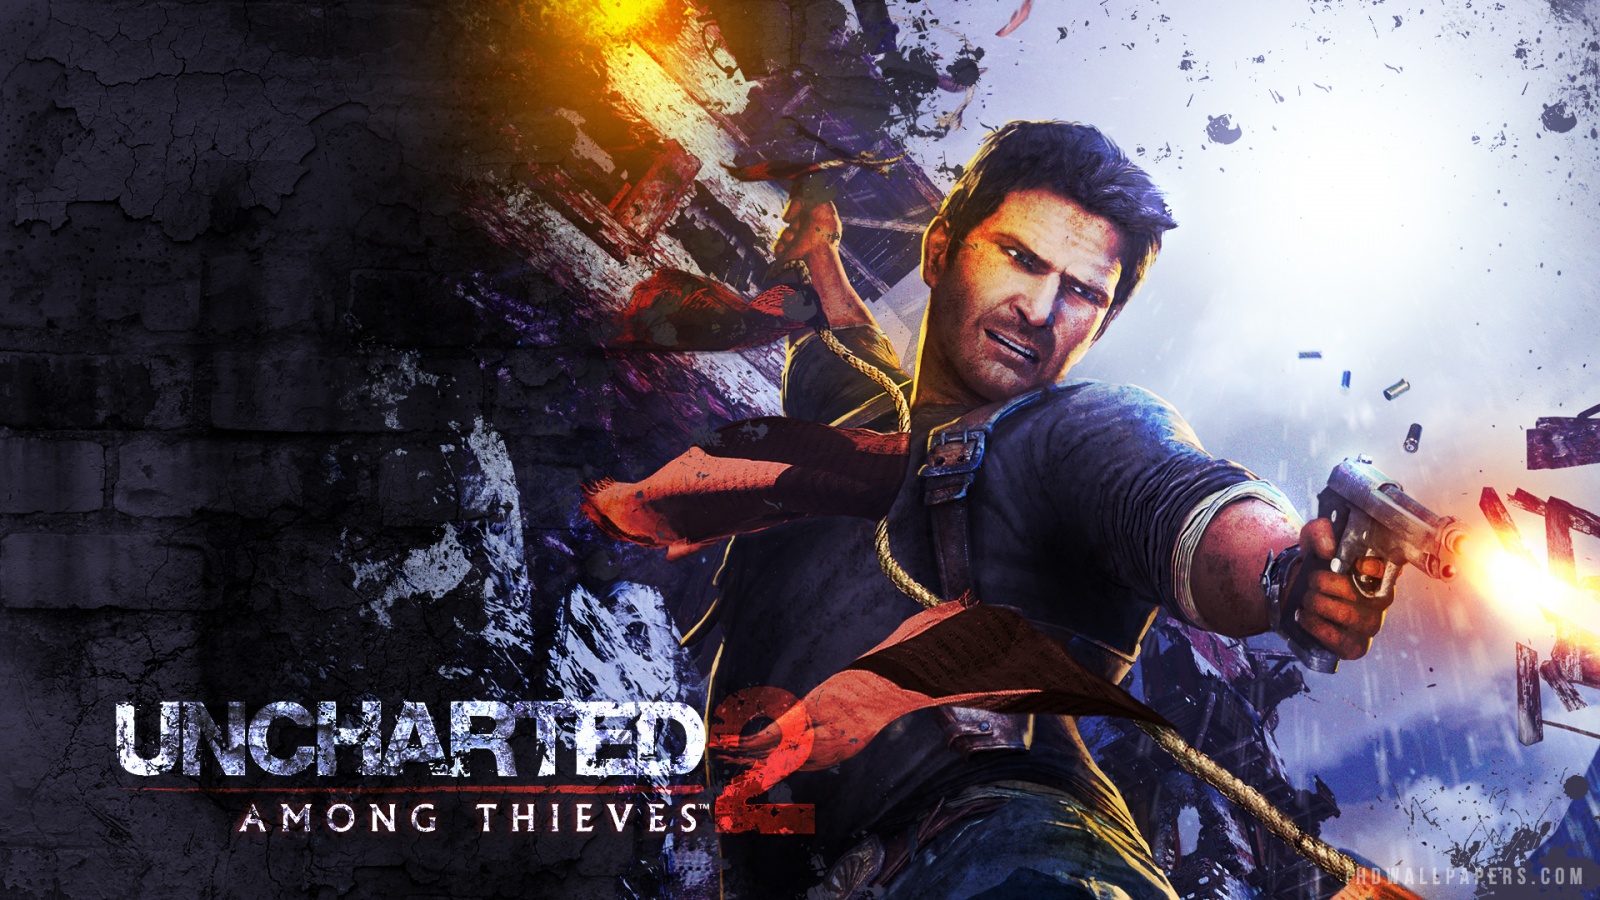 Uncharted 2 Among Thieves HD Wallpaper   iHD Wallpapers 1600x900